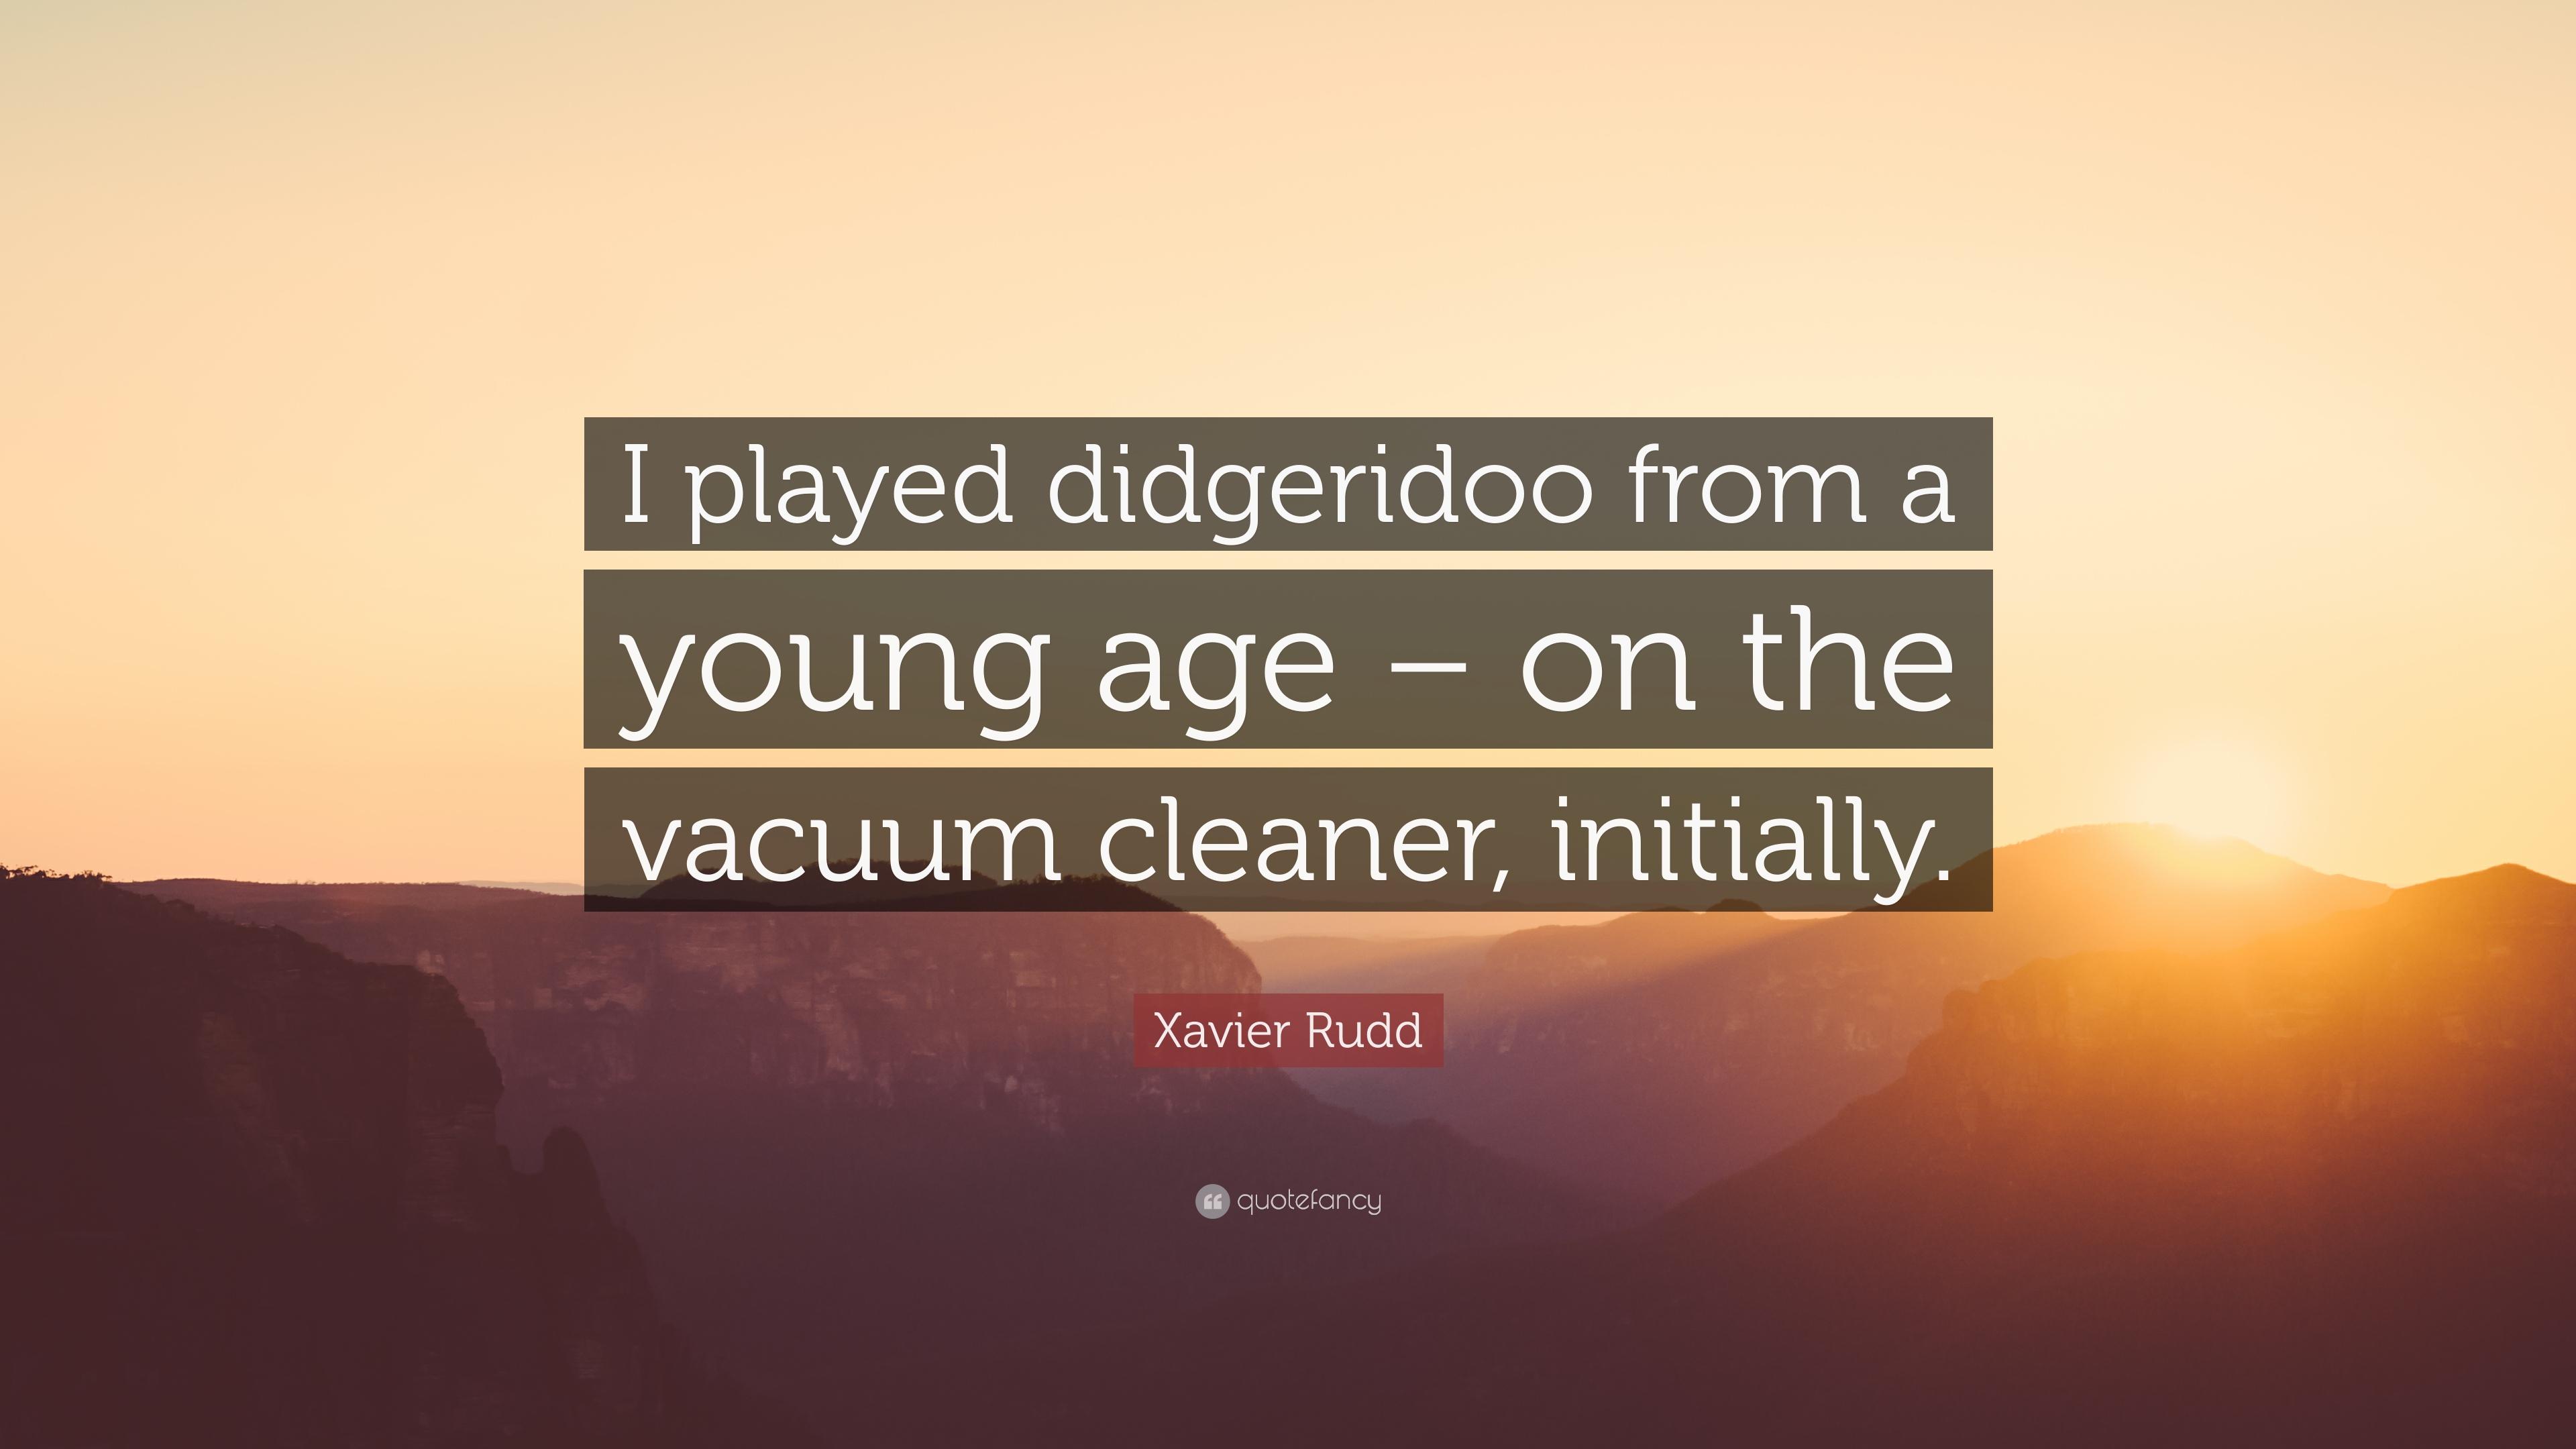 Xavier Rudd Quote: “I played didgeridoo from a young age